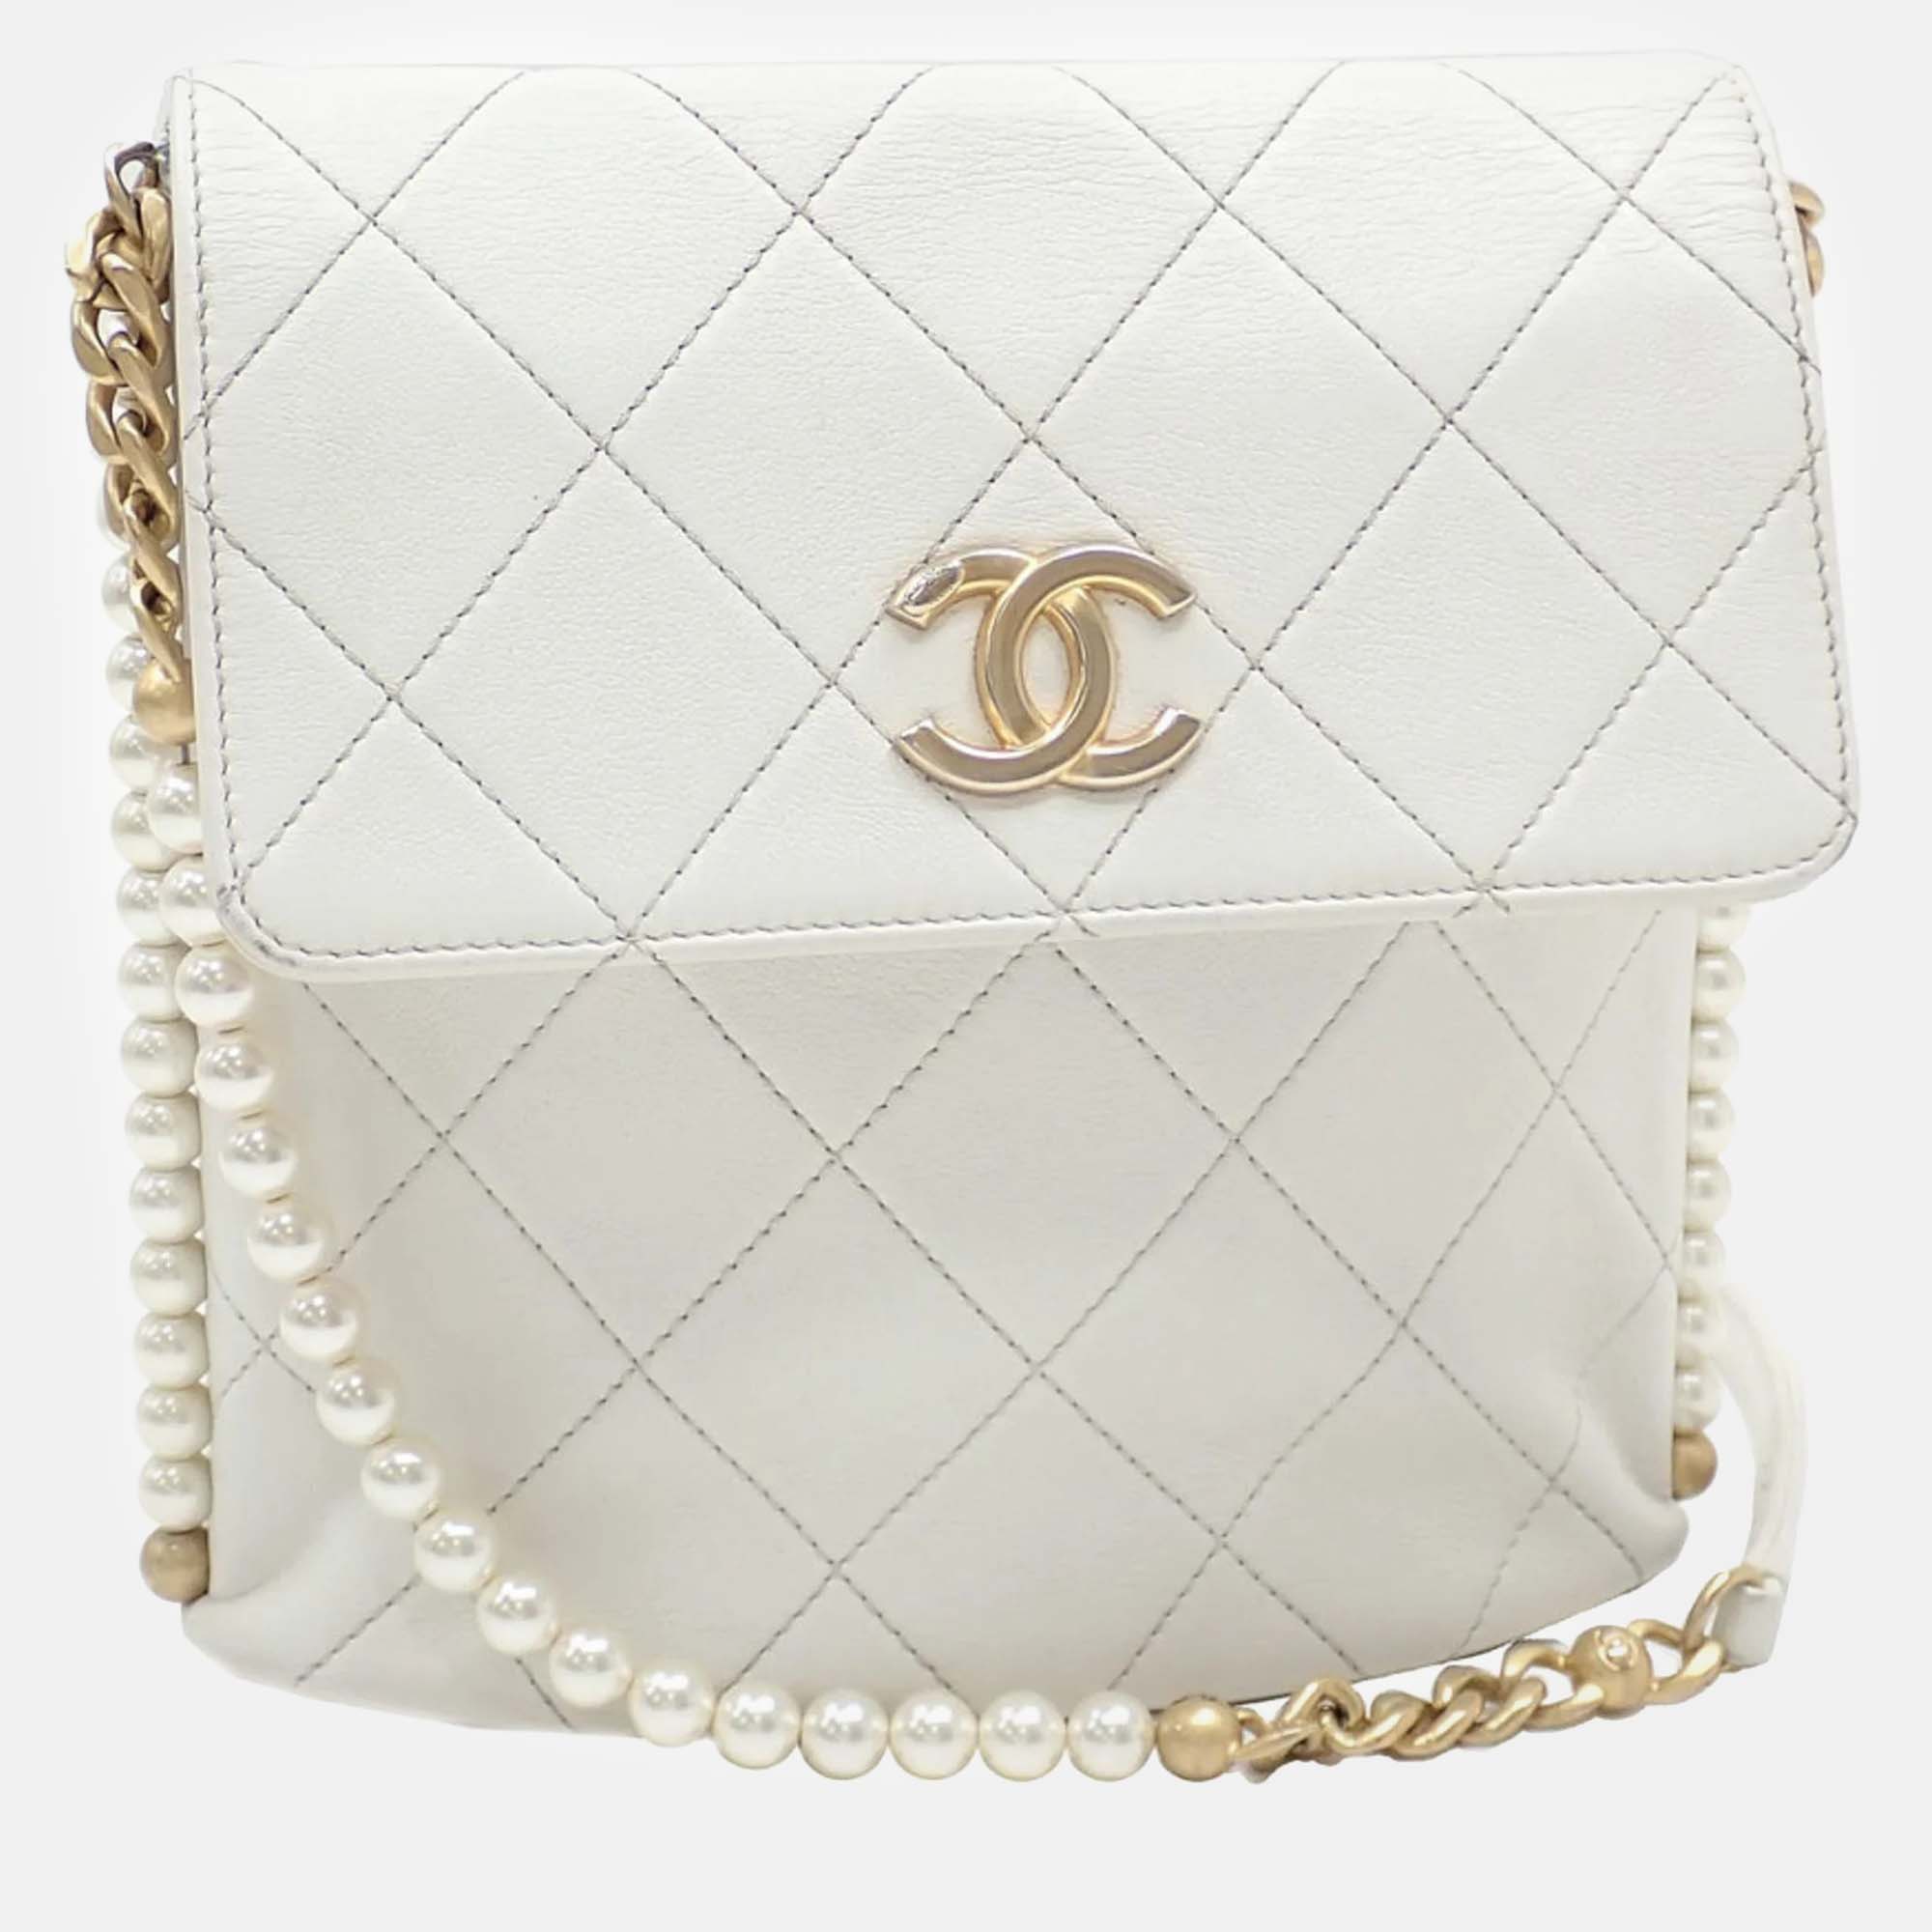 Chanel quilted calfskin small chain flap shoulder bag